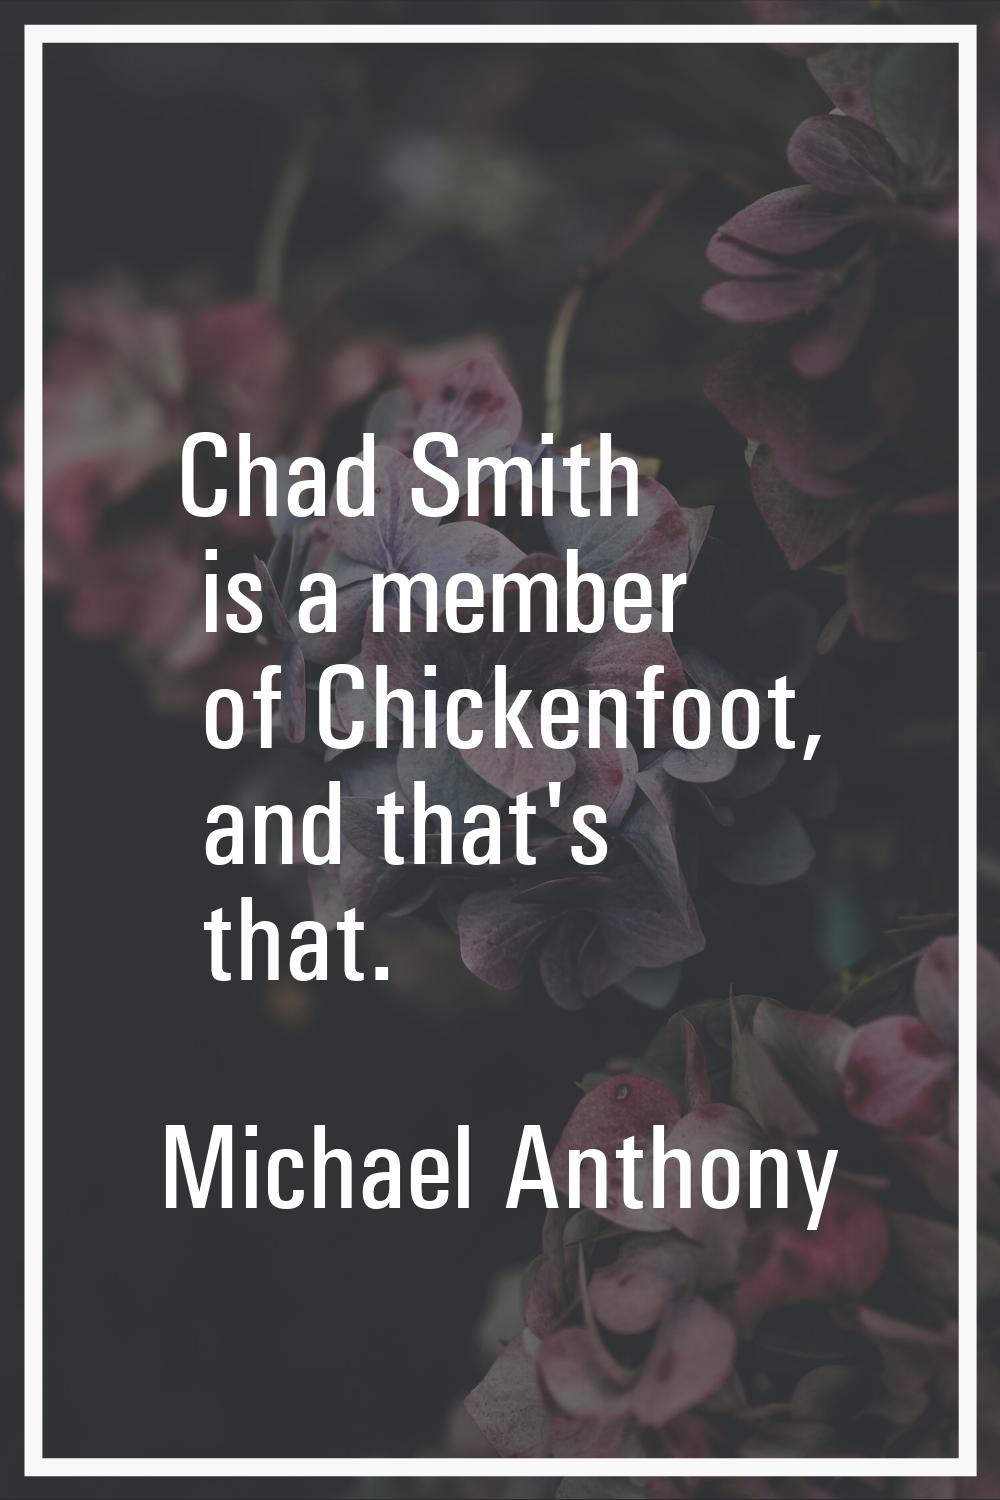 Chad Smith is a member of Chickenfoot, and that's that.